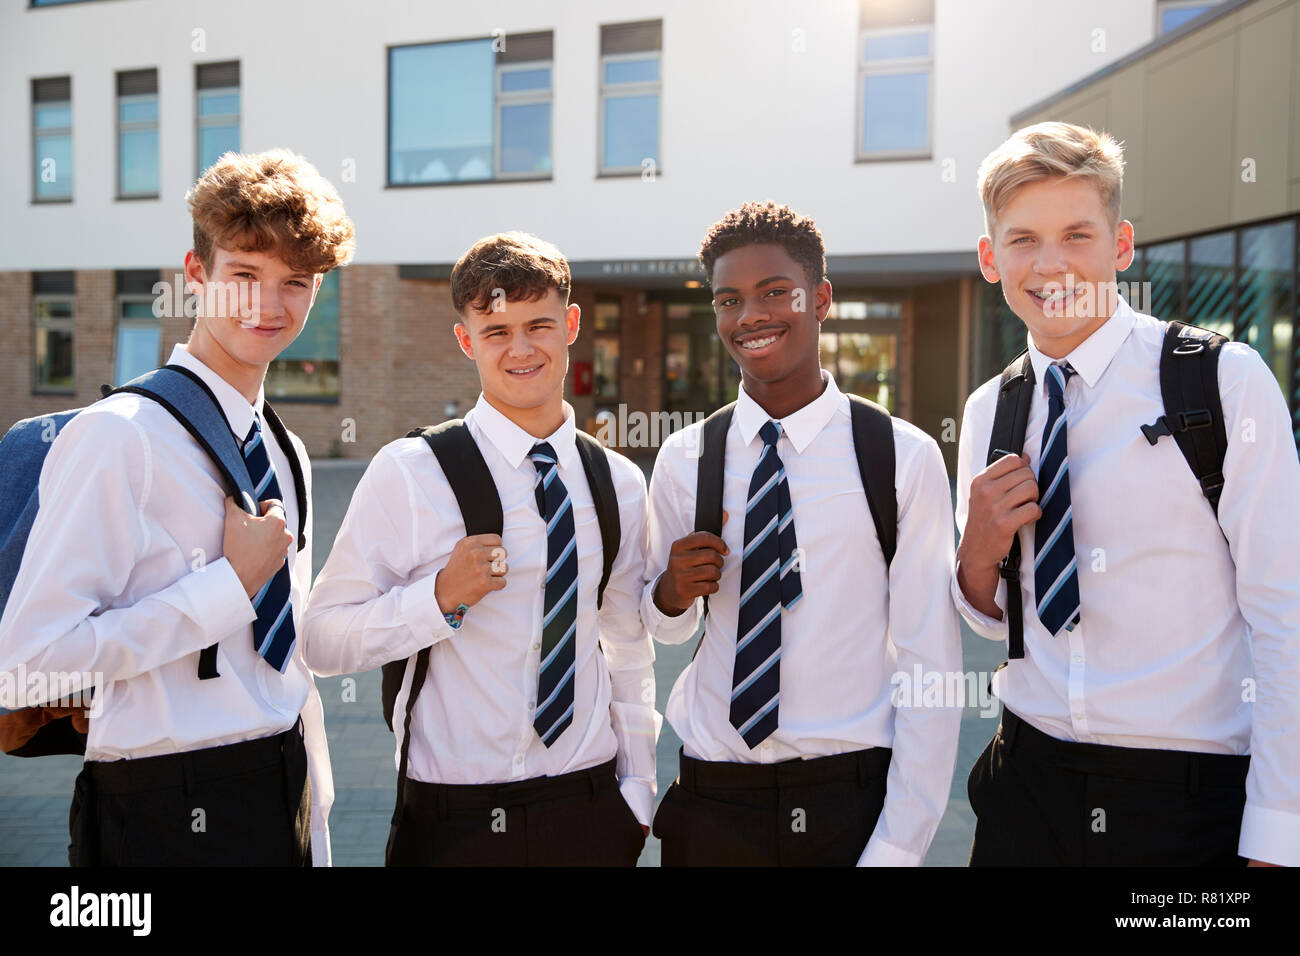 Portrait Of Smiling Male High School Students Wearing Uniform Outside College Building Stock Photo